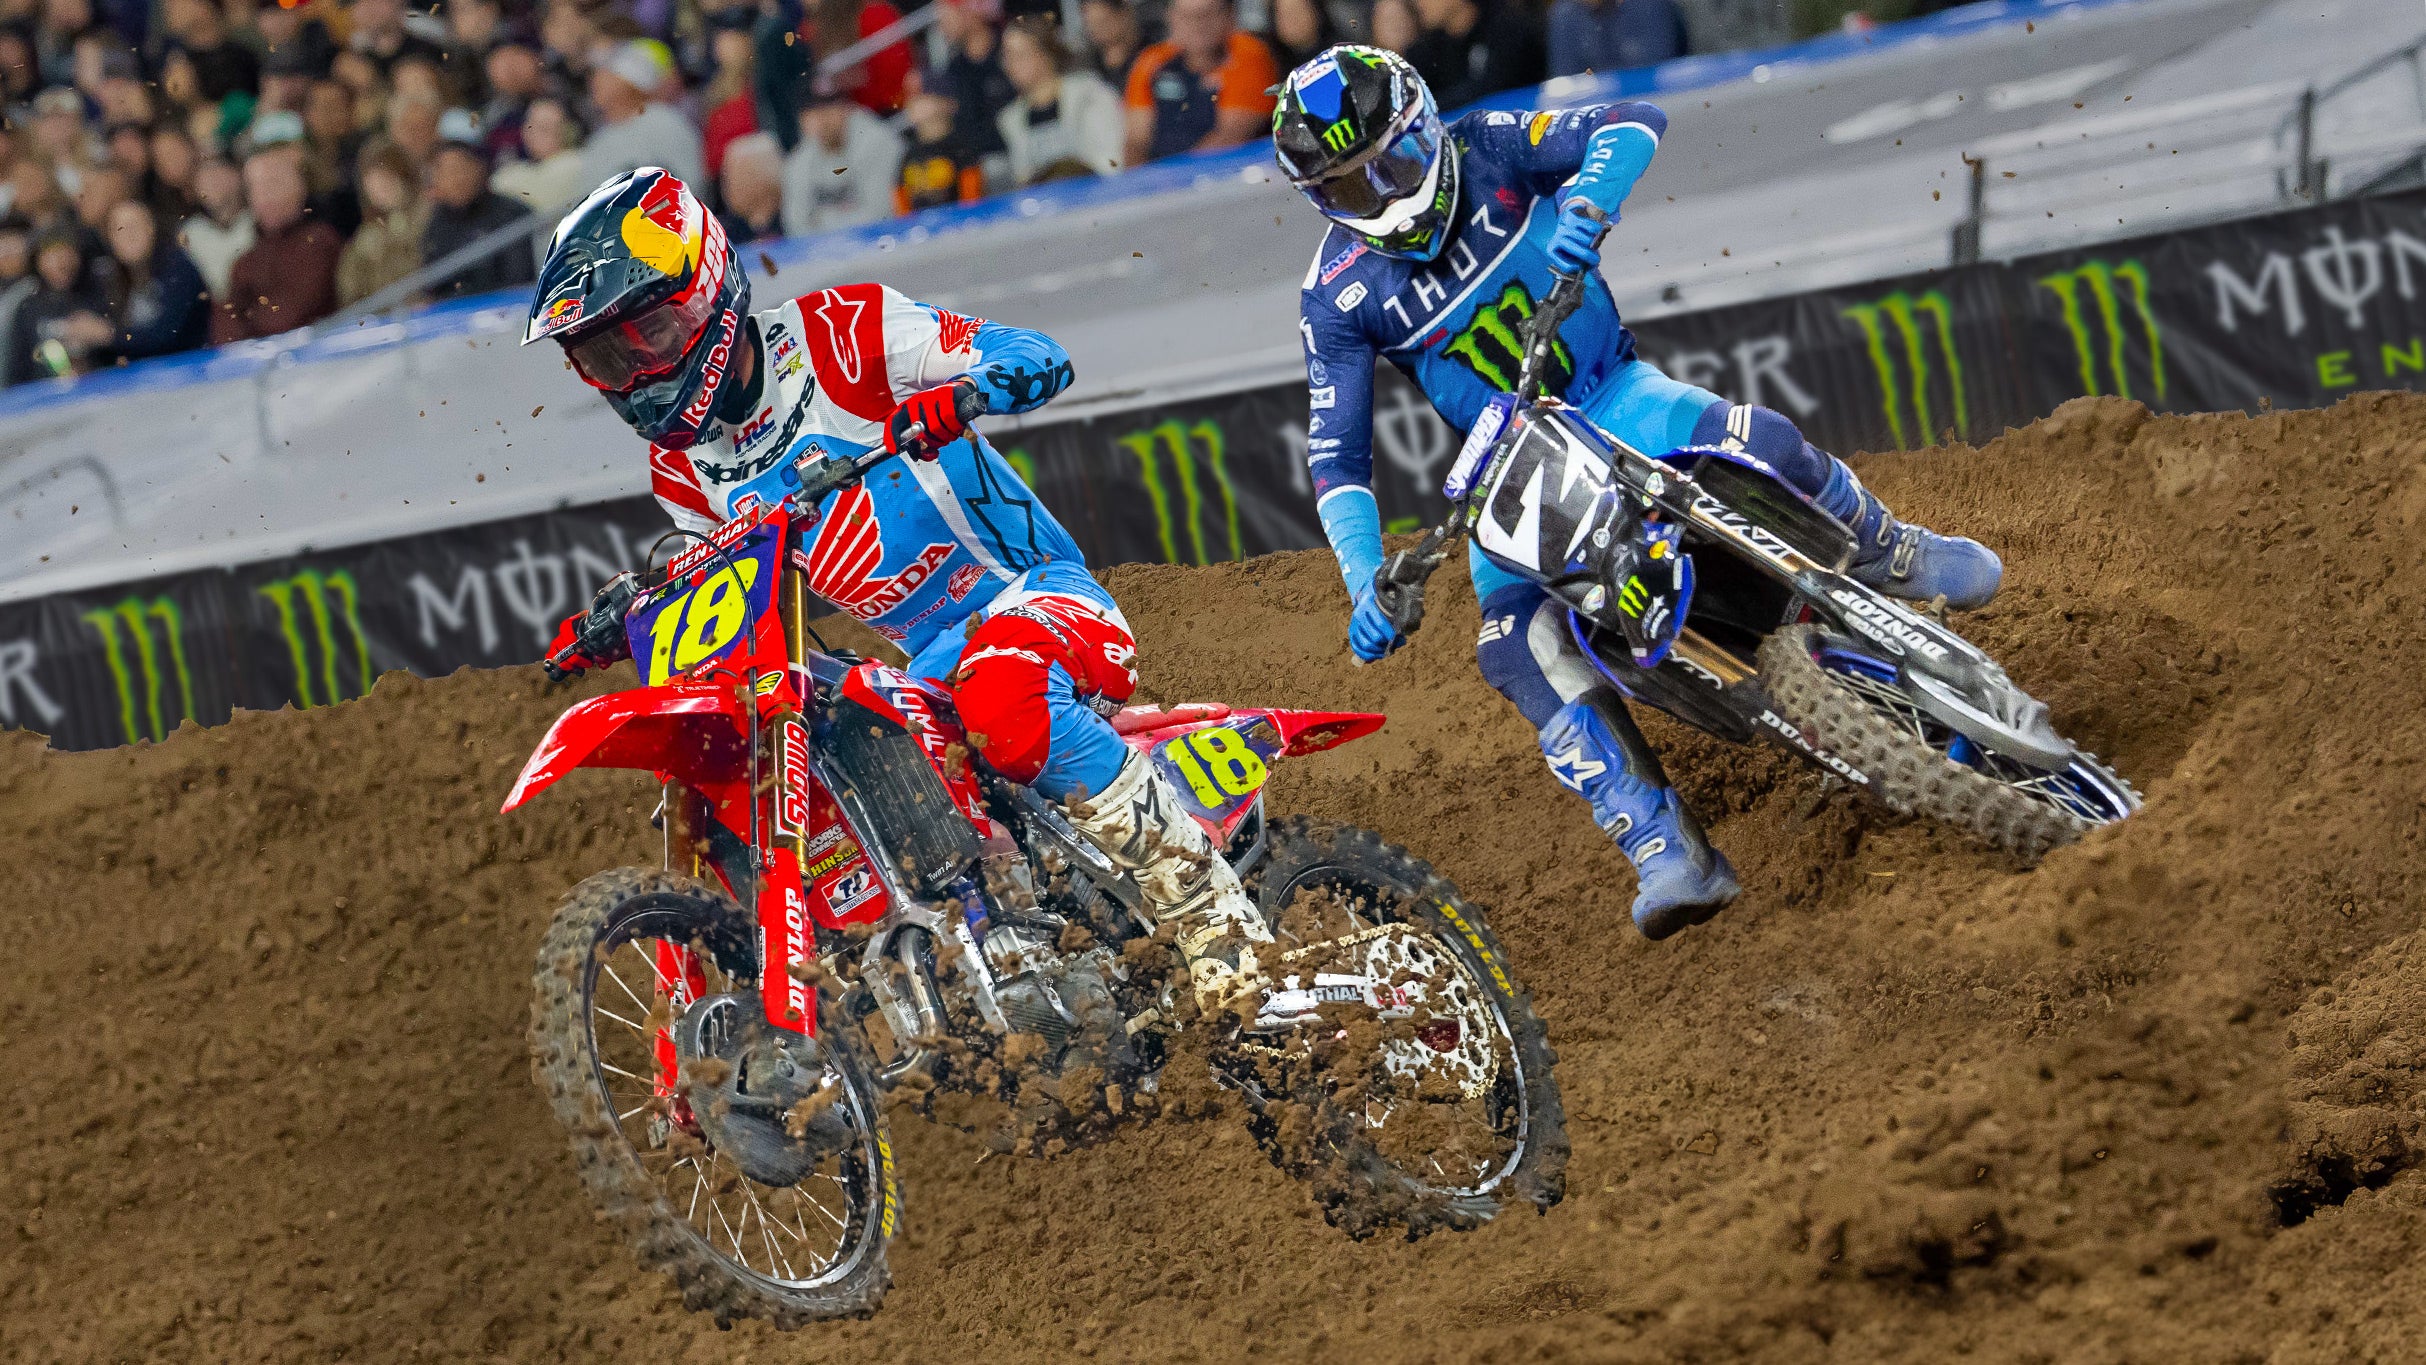 SuperMotocross World Championship Finals in Fort Worth promo photo for TM / Venue presale offer code